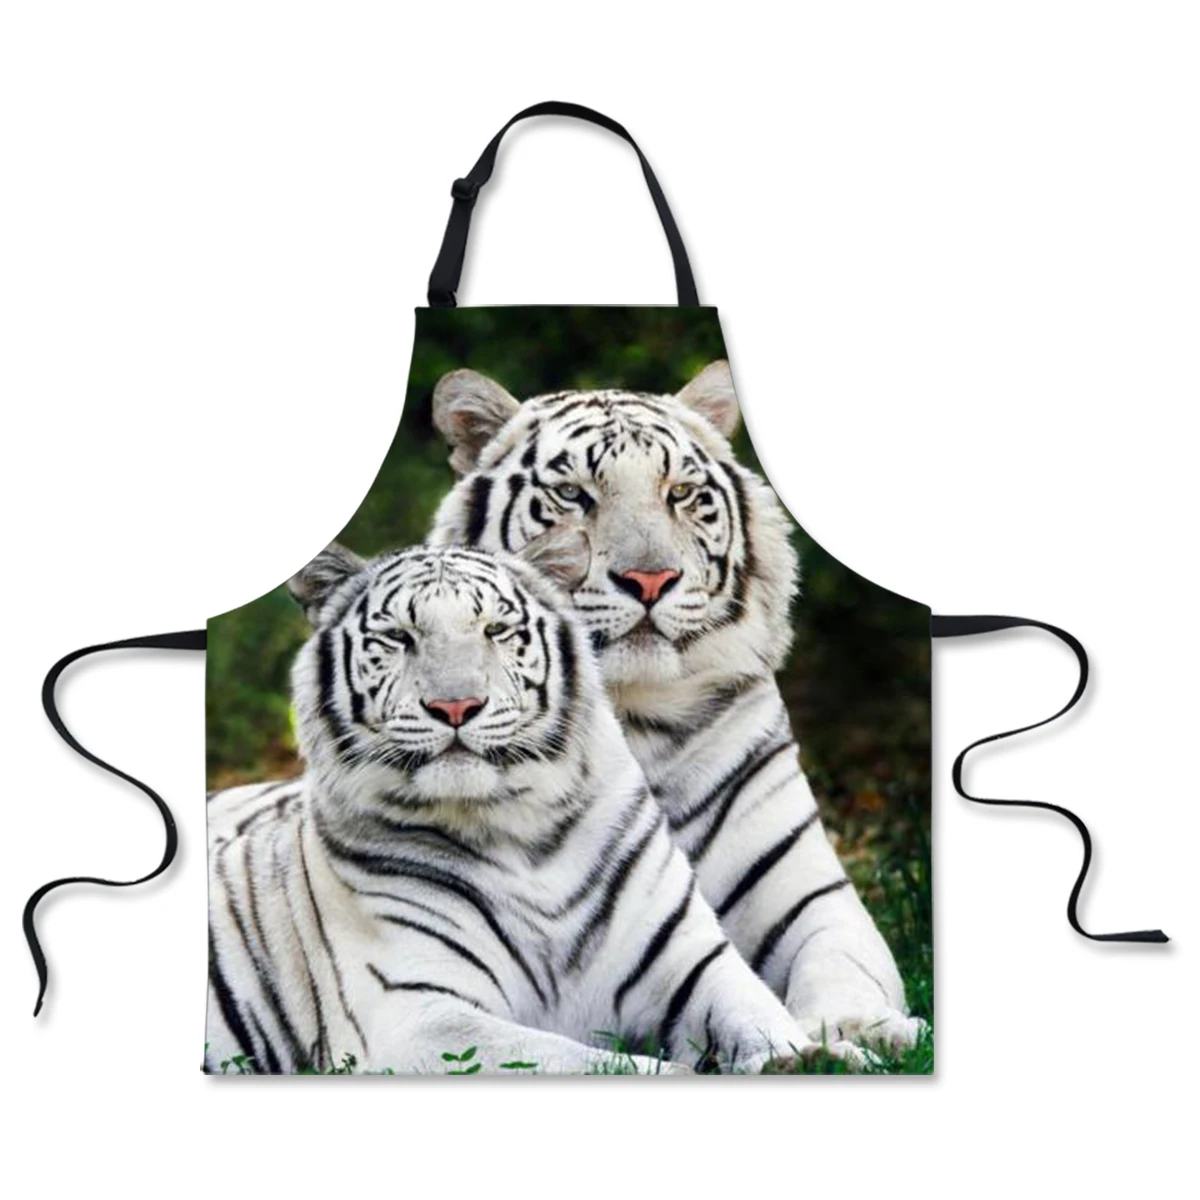 

Funny Tiger Lion 3D Print Kitchen Aprons Waterproof Cooking BBQ Apron for Women Men Home Cleaning Sleeveless Anti-oil Apron